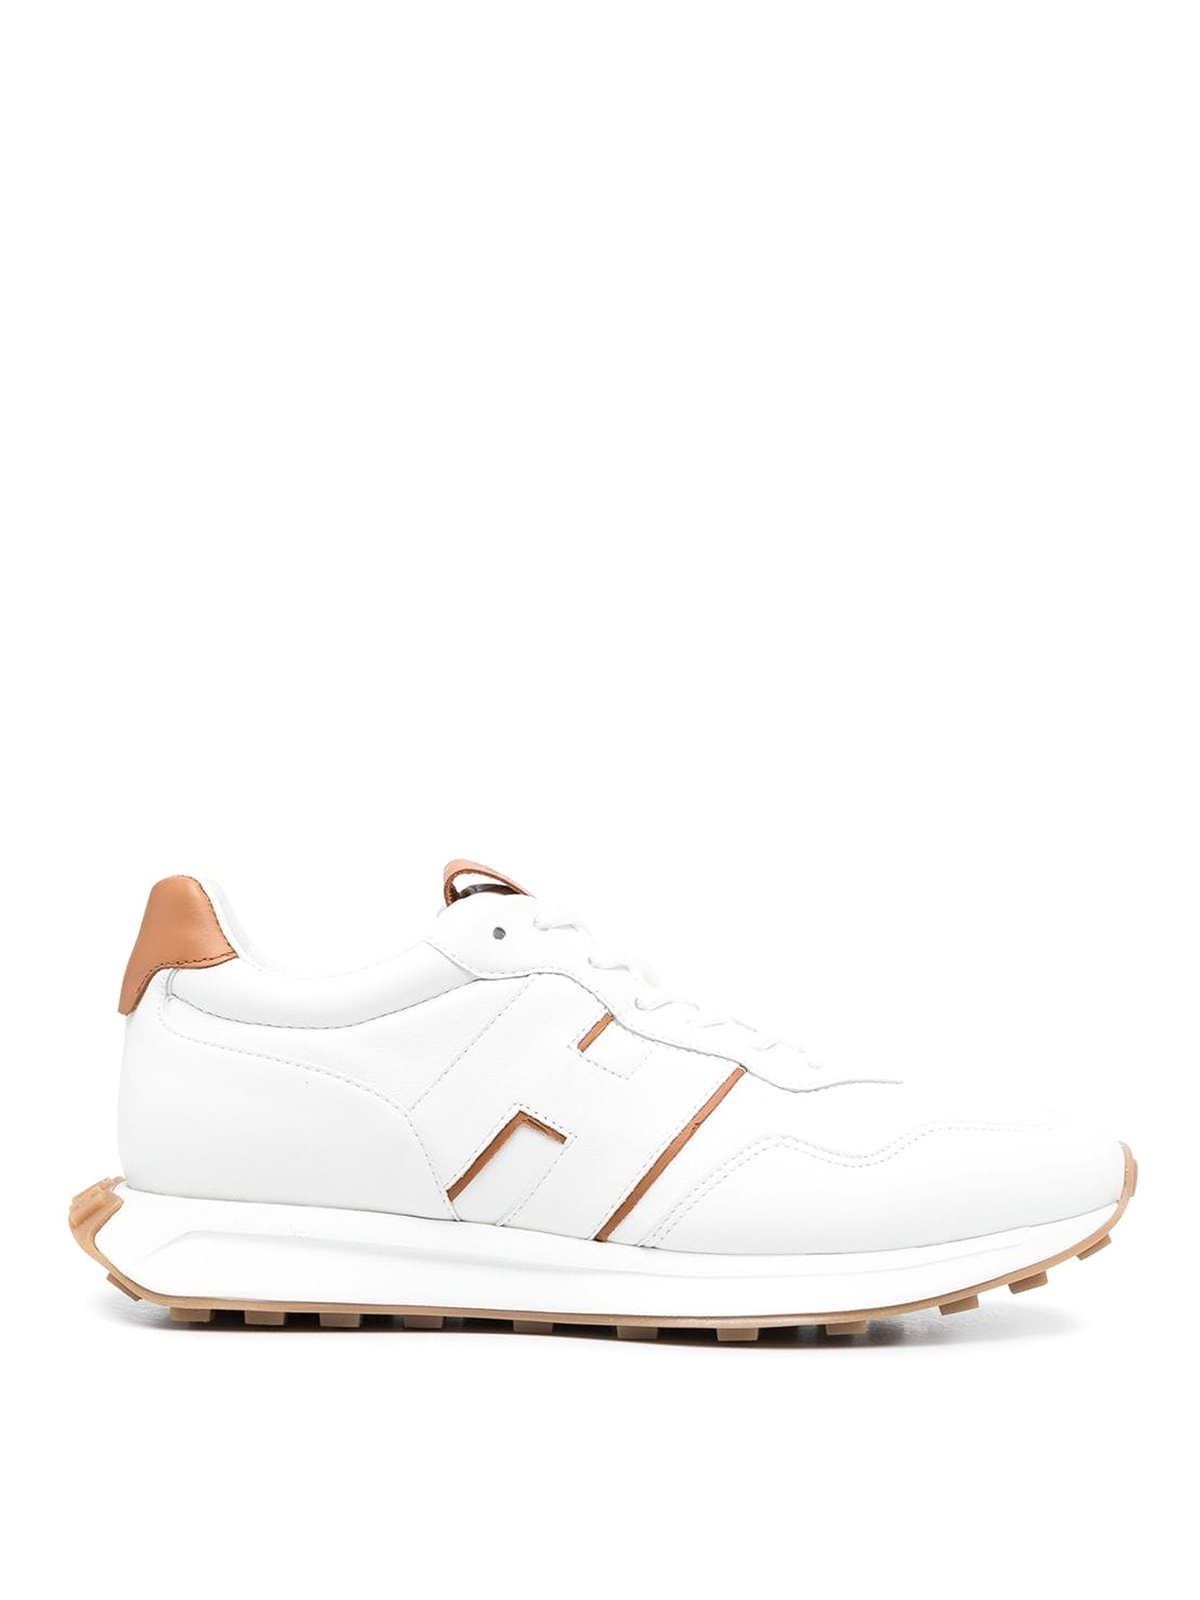 Hogan Sneakers Leather In White